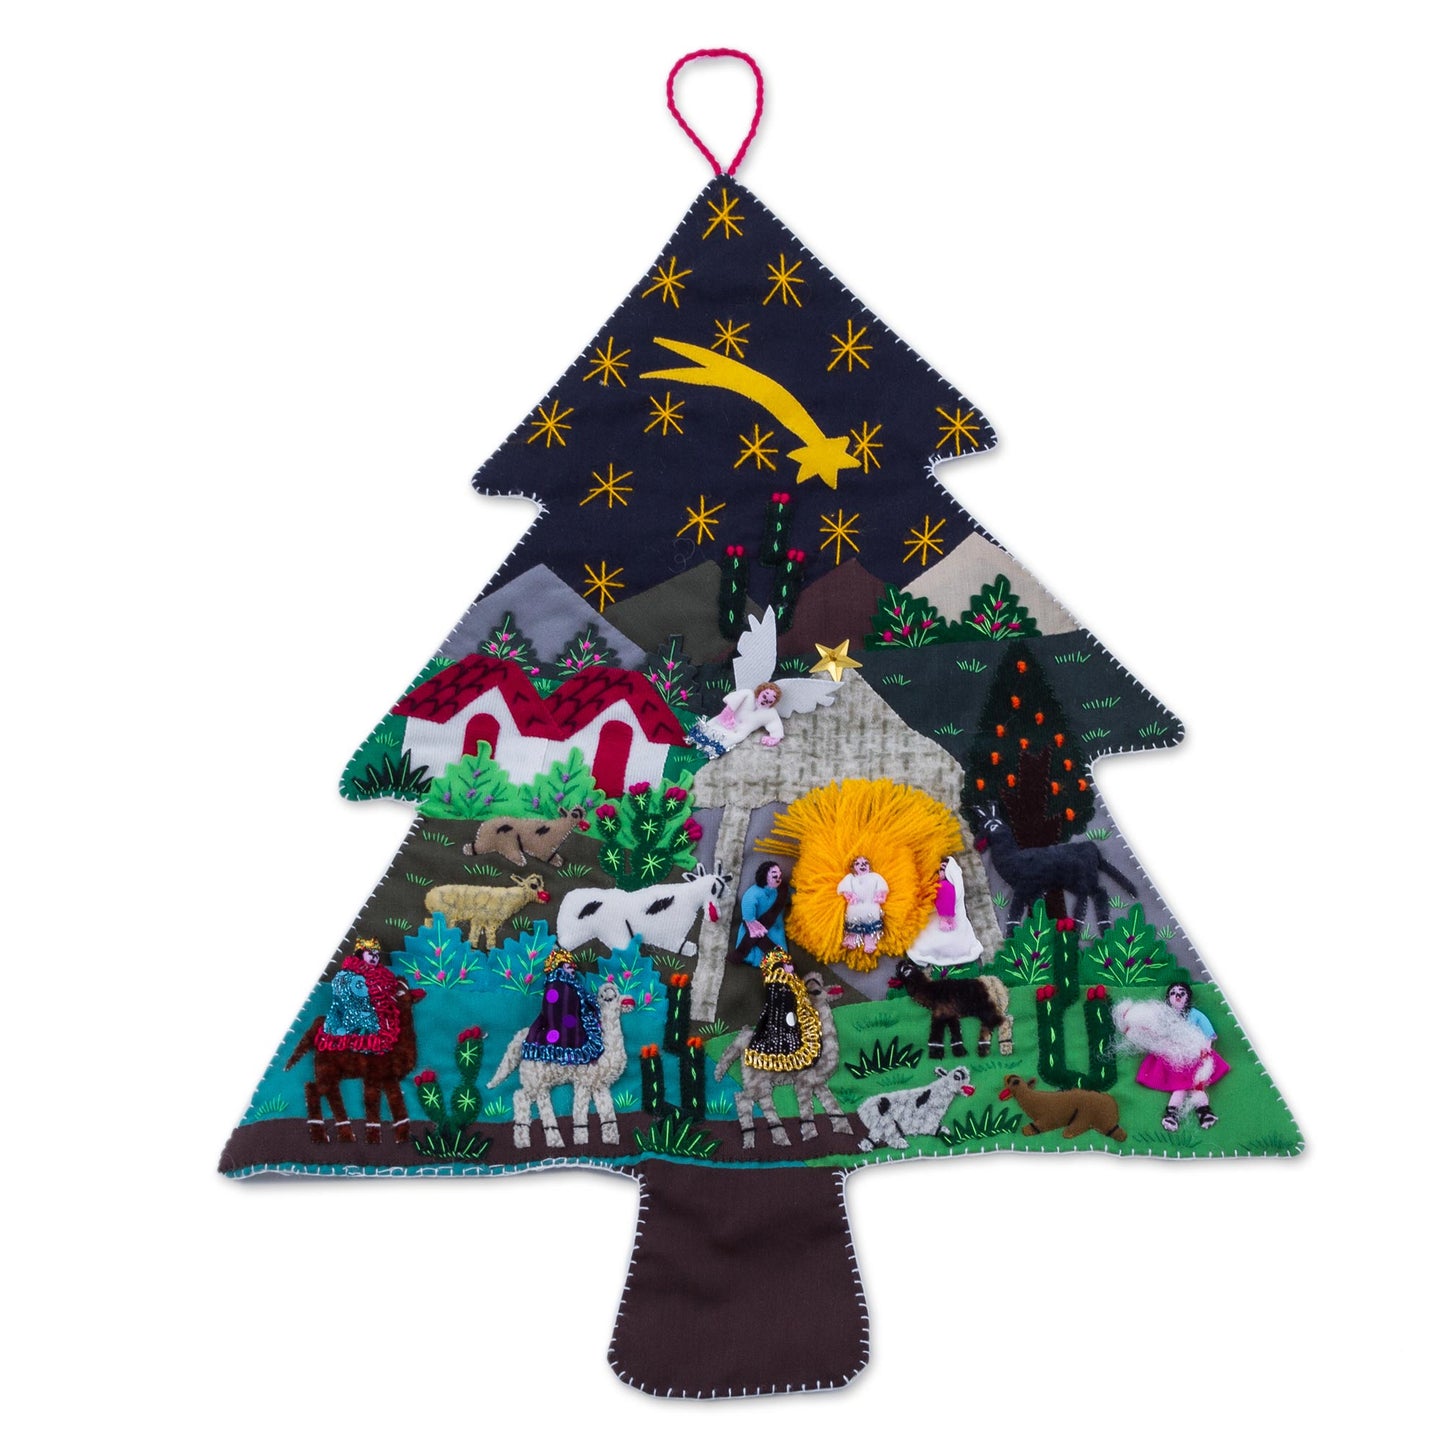 Andean Christmas Pine Handcrafted Andean Christmas Pine Tree Applique Wall Hanging